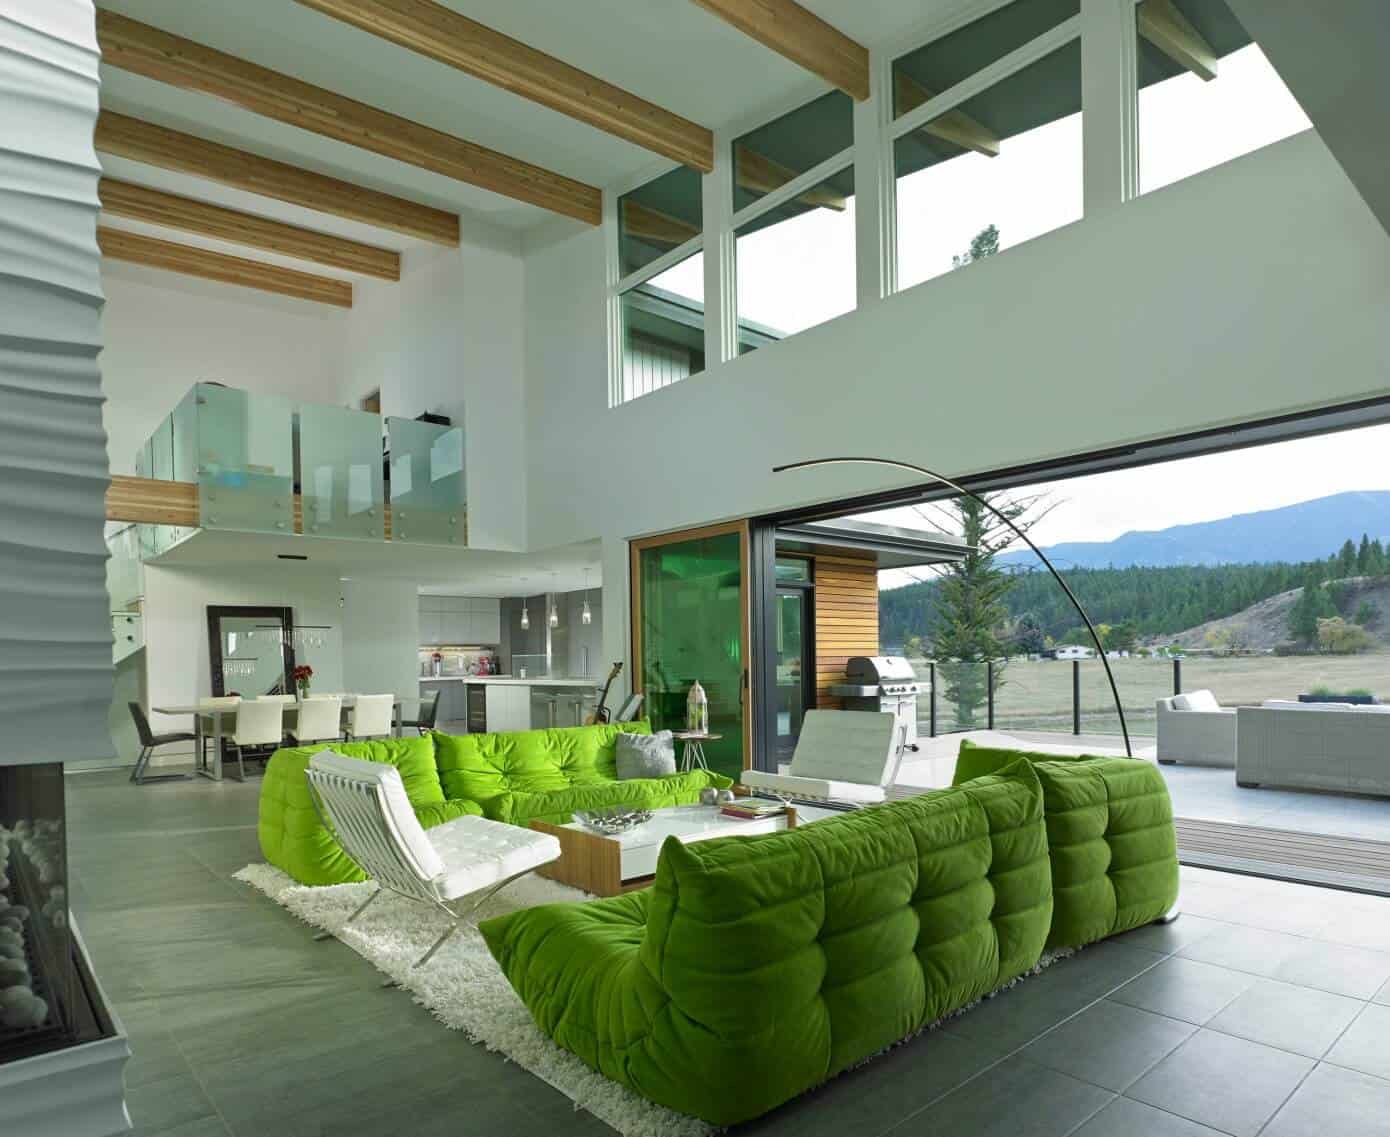 This Living Room in Green and White is so Uplifting